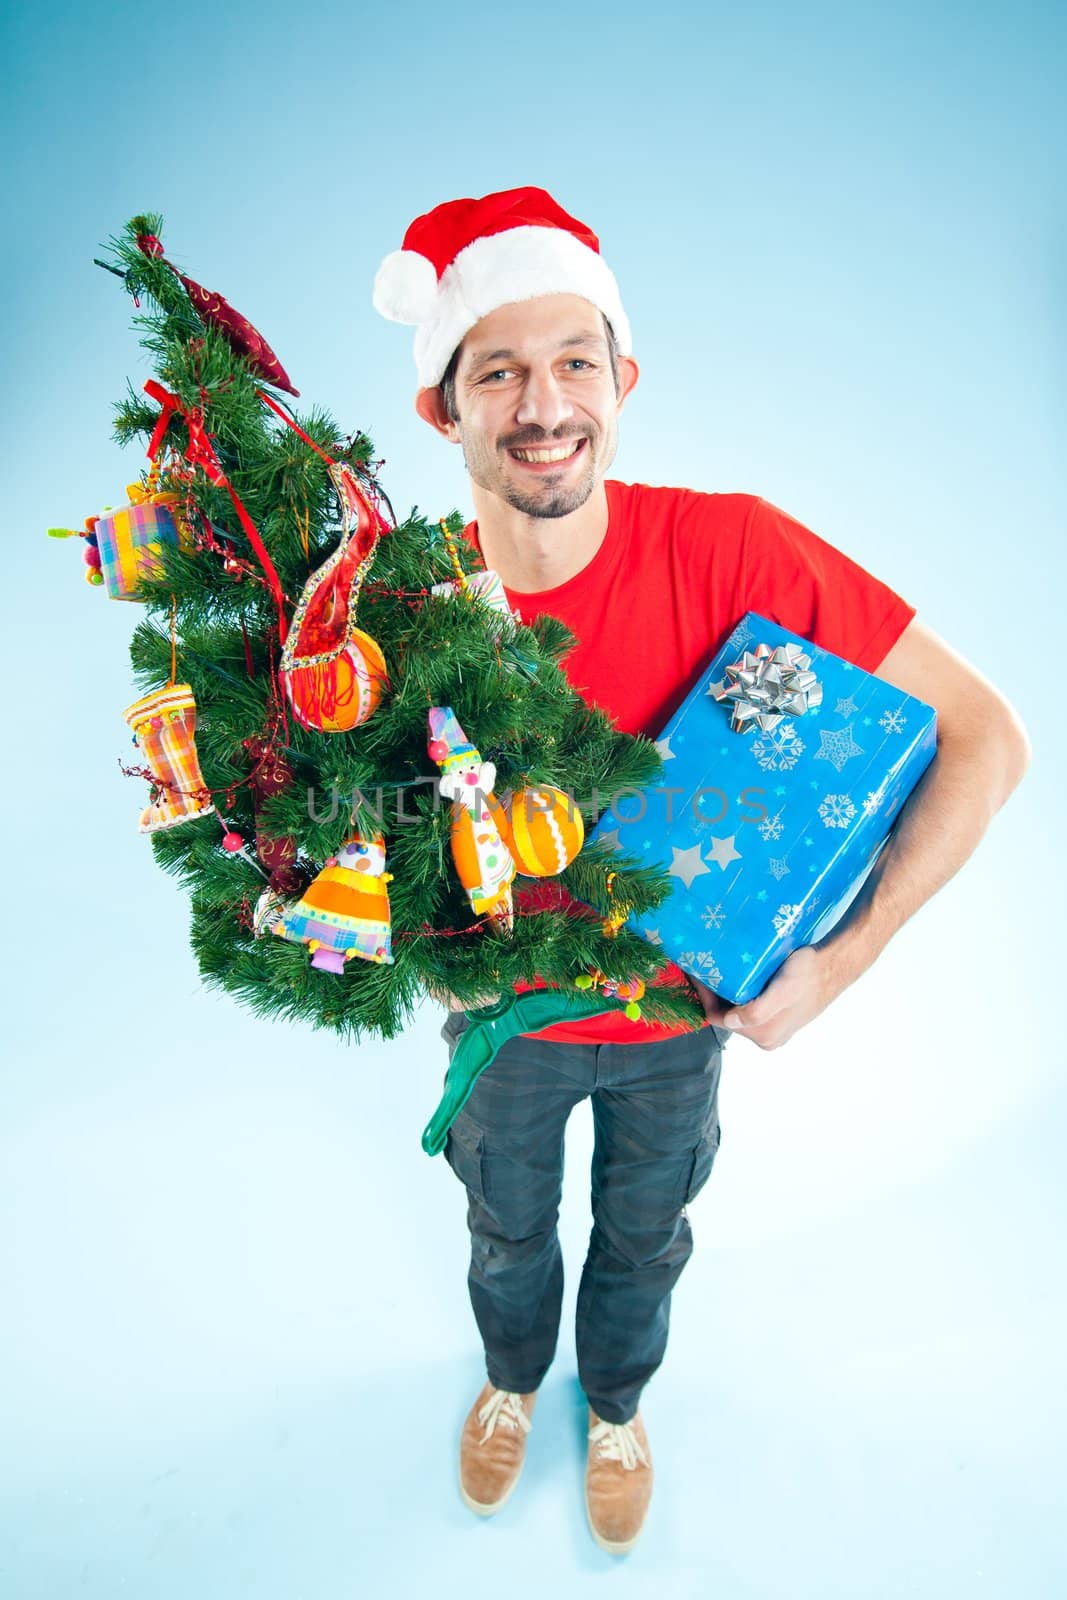 Happy smile young man in Santa hat with gifts and a Christmas tree